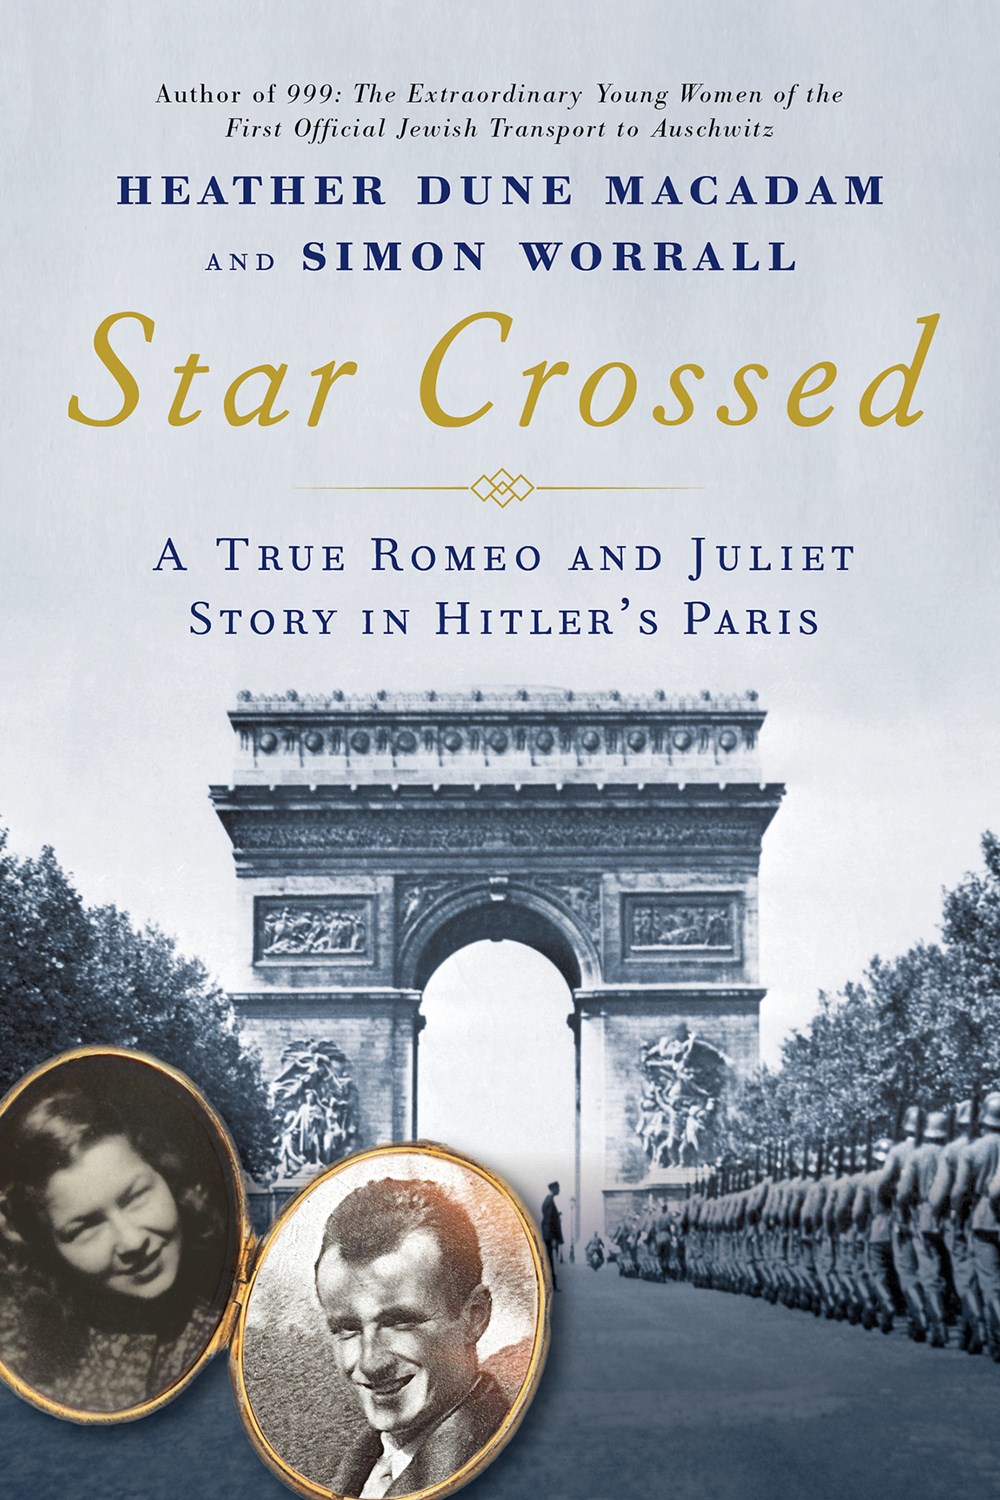 Star Crossed: A True Romeo and Juliet Story in Hitler’s Paris